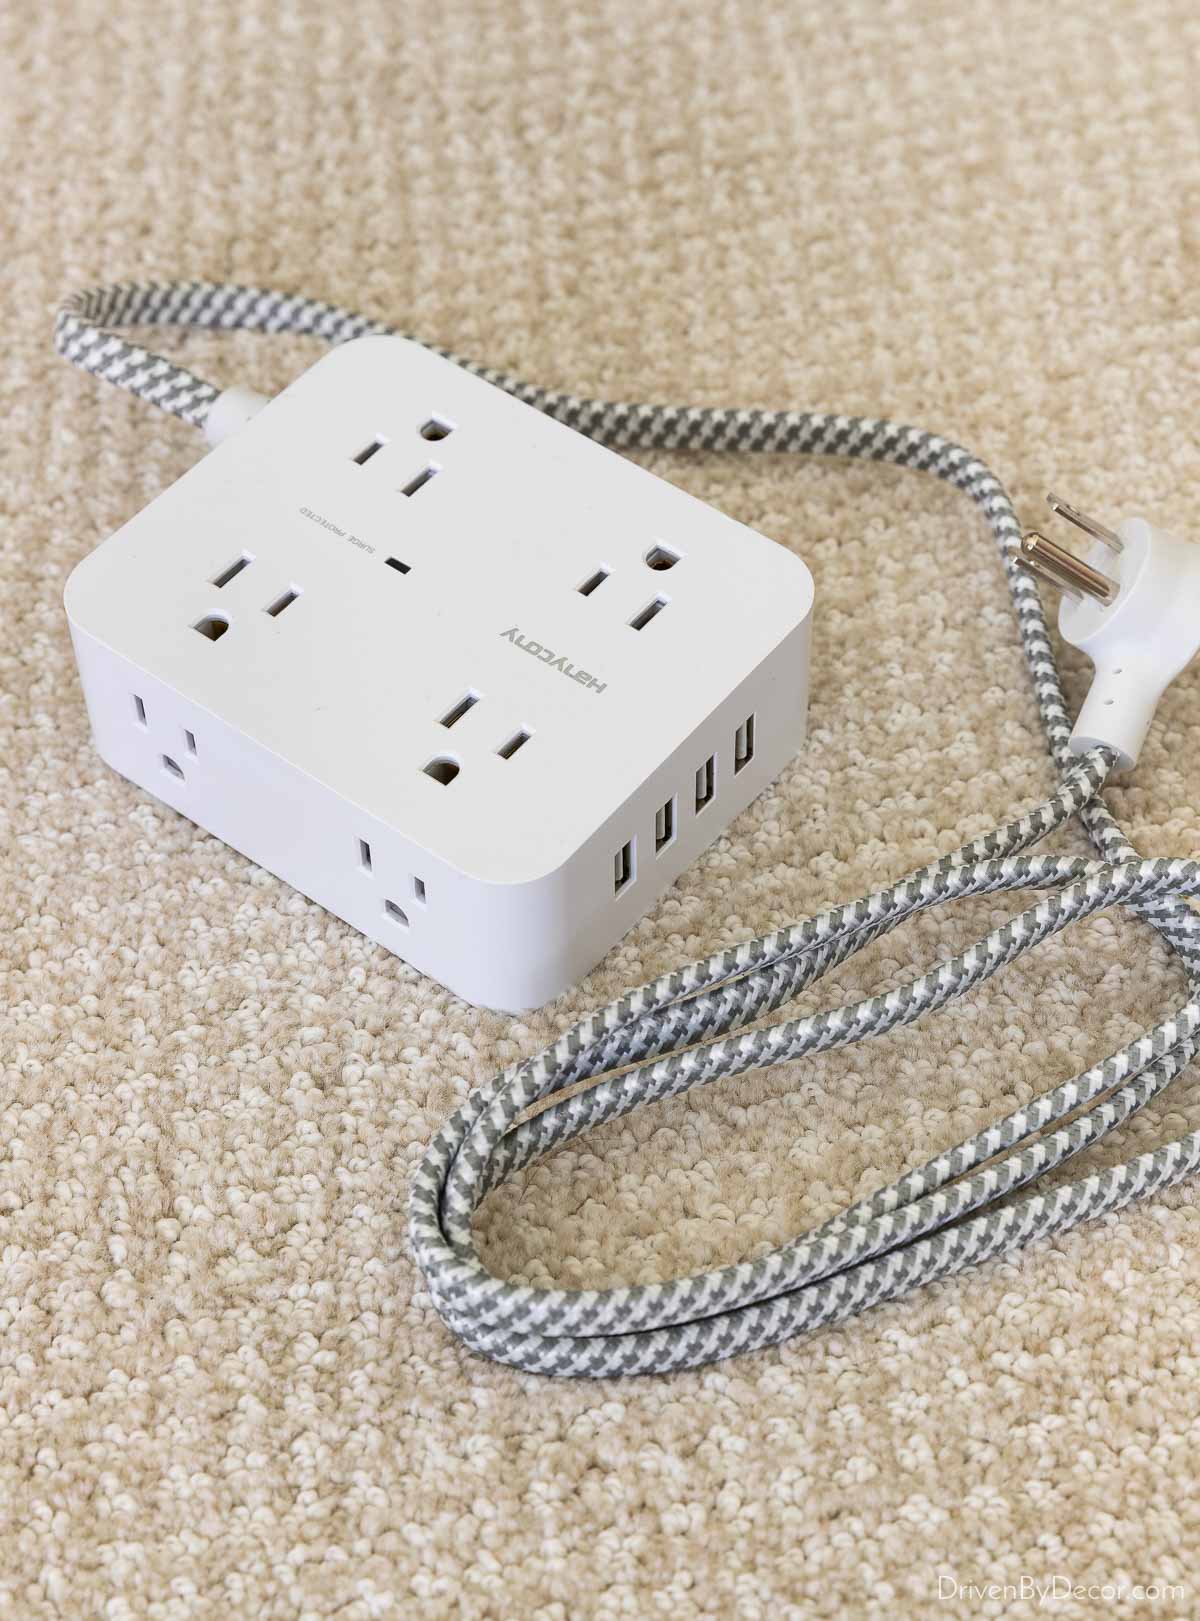 Combination surge protector and extension cord that's perfect for college dorms!